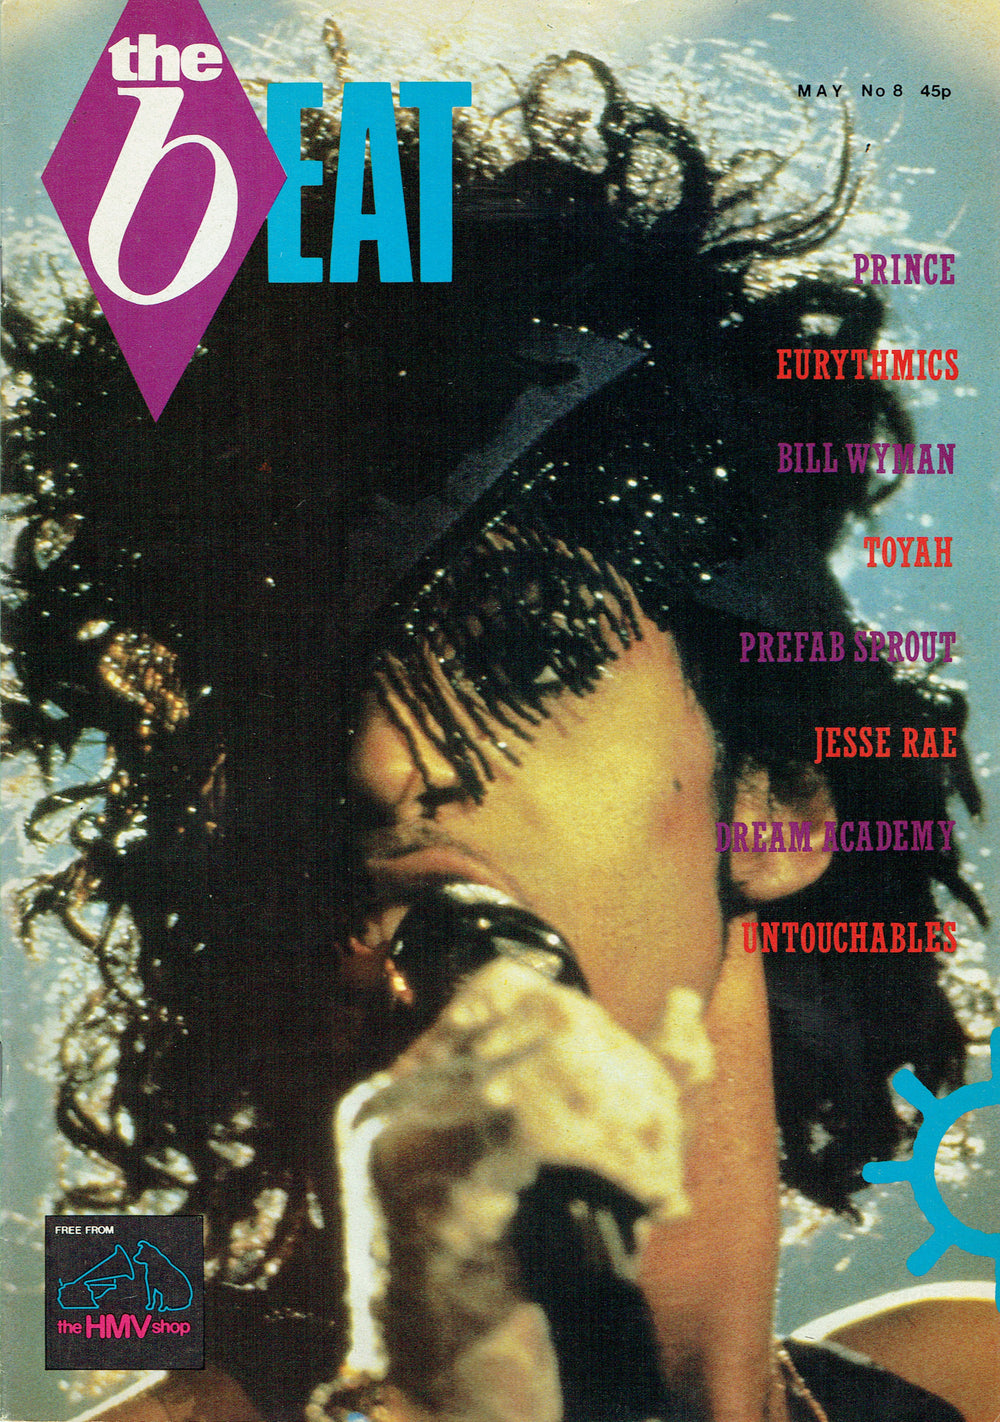 Prince – The Beat HMV Magazine No 8 Prince Cover & Competition & 2 Page Article 1985